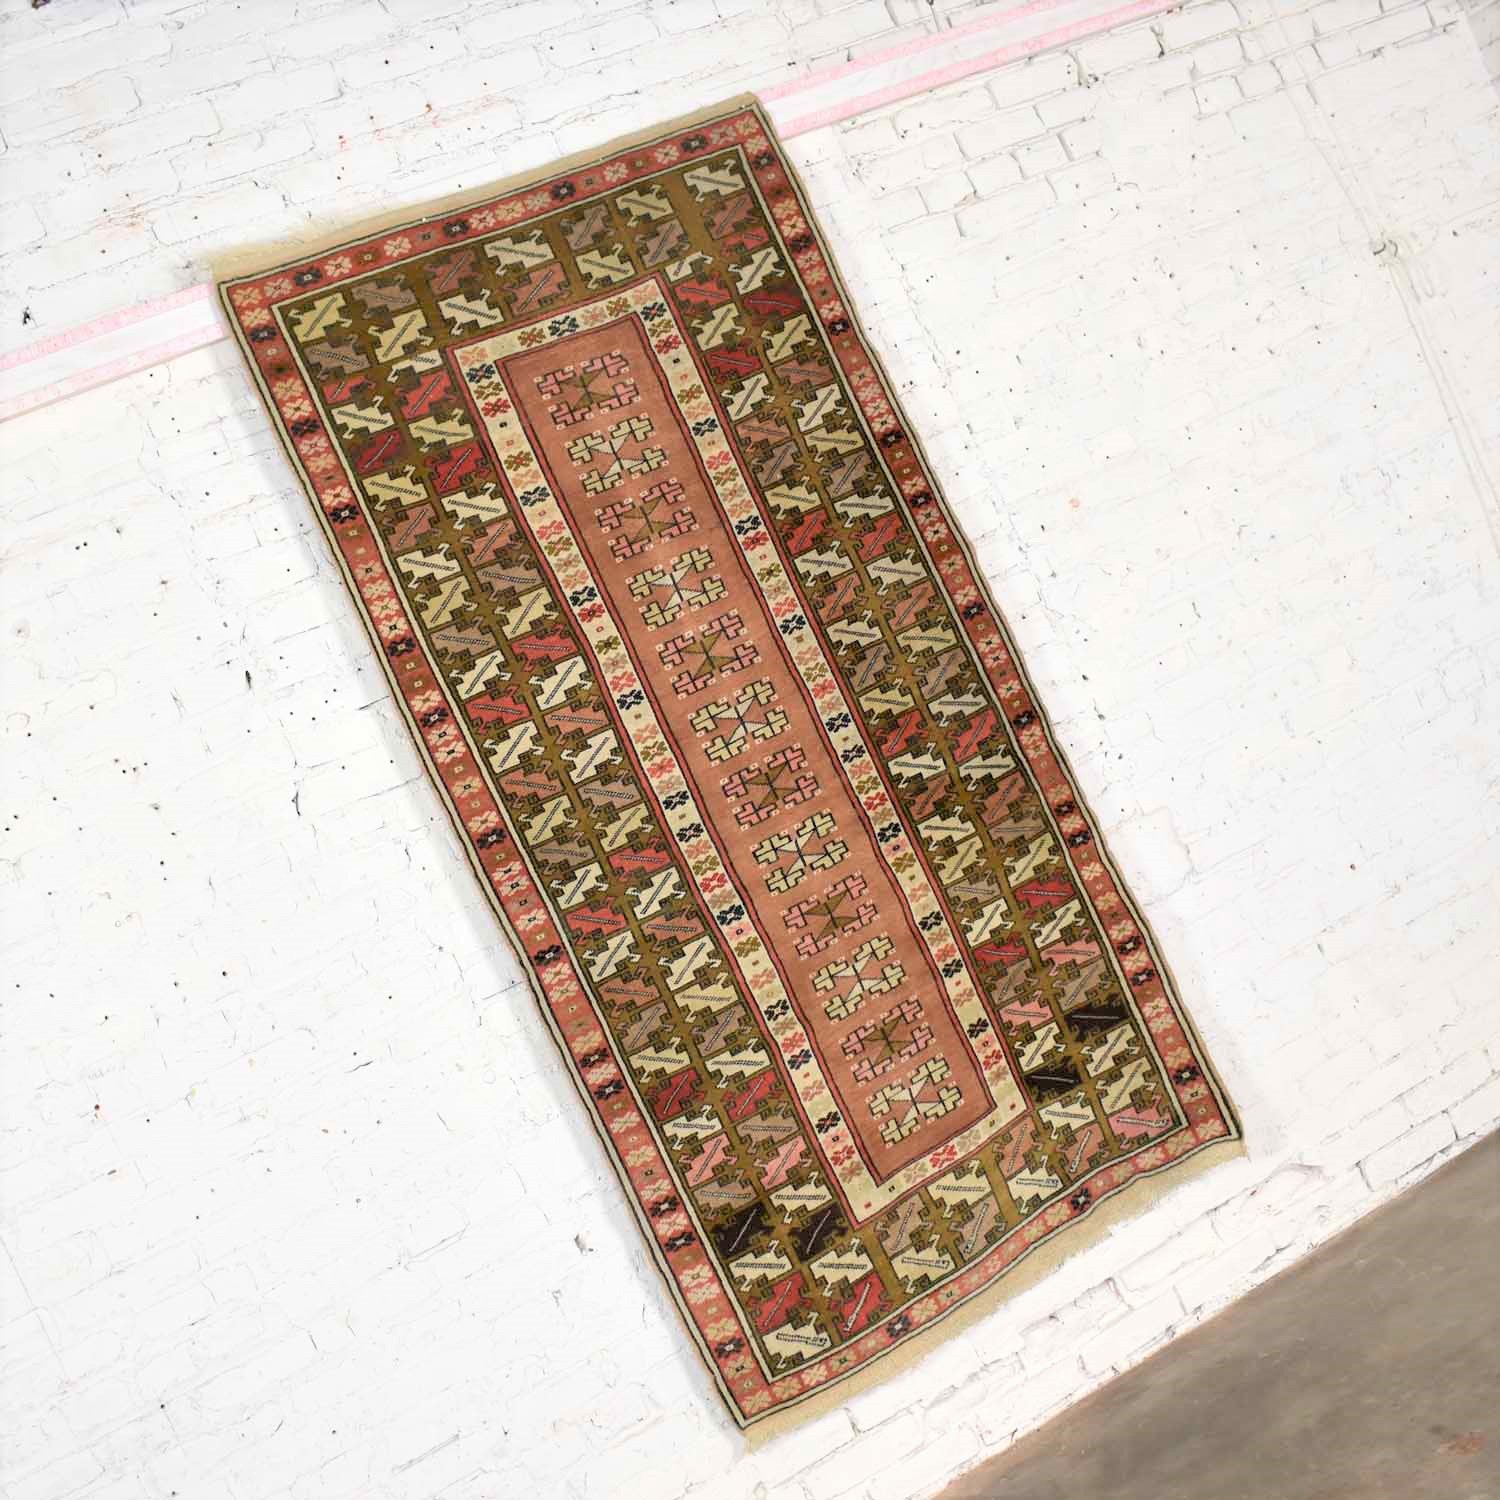 Vintage Wool Turkish Milas Style Woven Made Rug 6’ 7 x 3’ 6.5